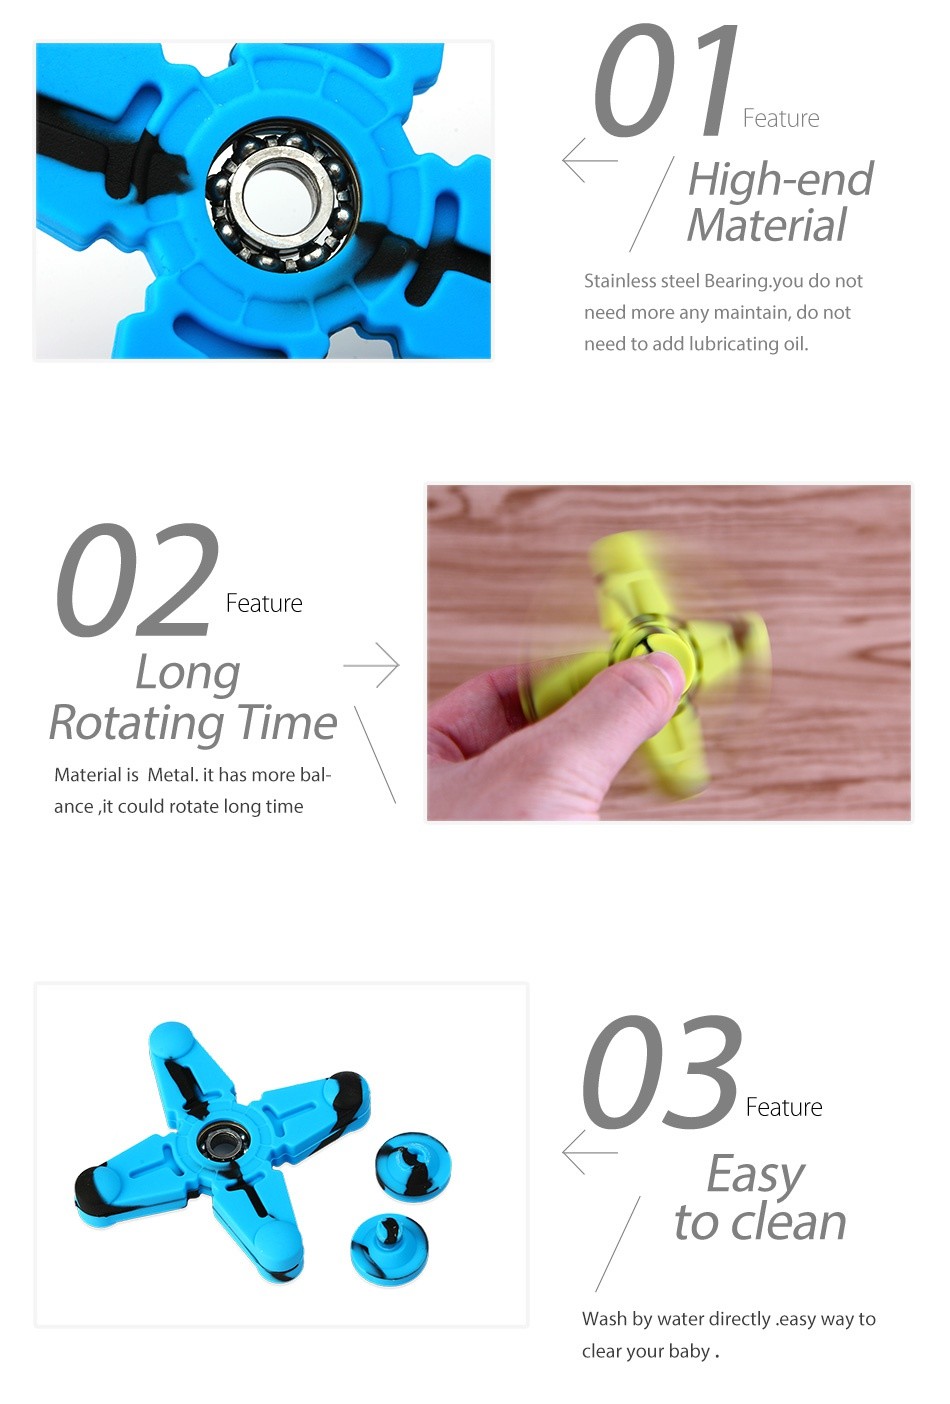 Vapesoon Silicone Hand Spinner Fidget Toy with Four Spins 07 High end Material Stainless steel Bearing you do not d to add lubricating oil 02 Feature Long    Rotating Time Material is Metal  it has more bal ance it could rotate long time 03 Feature Easy to cean Wash by water directly easy way to clear your baby